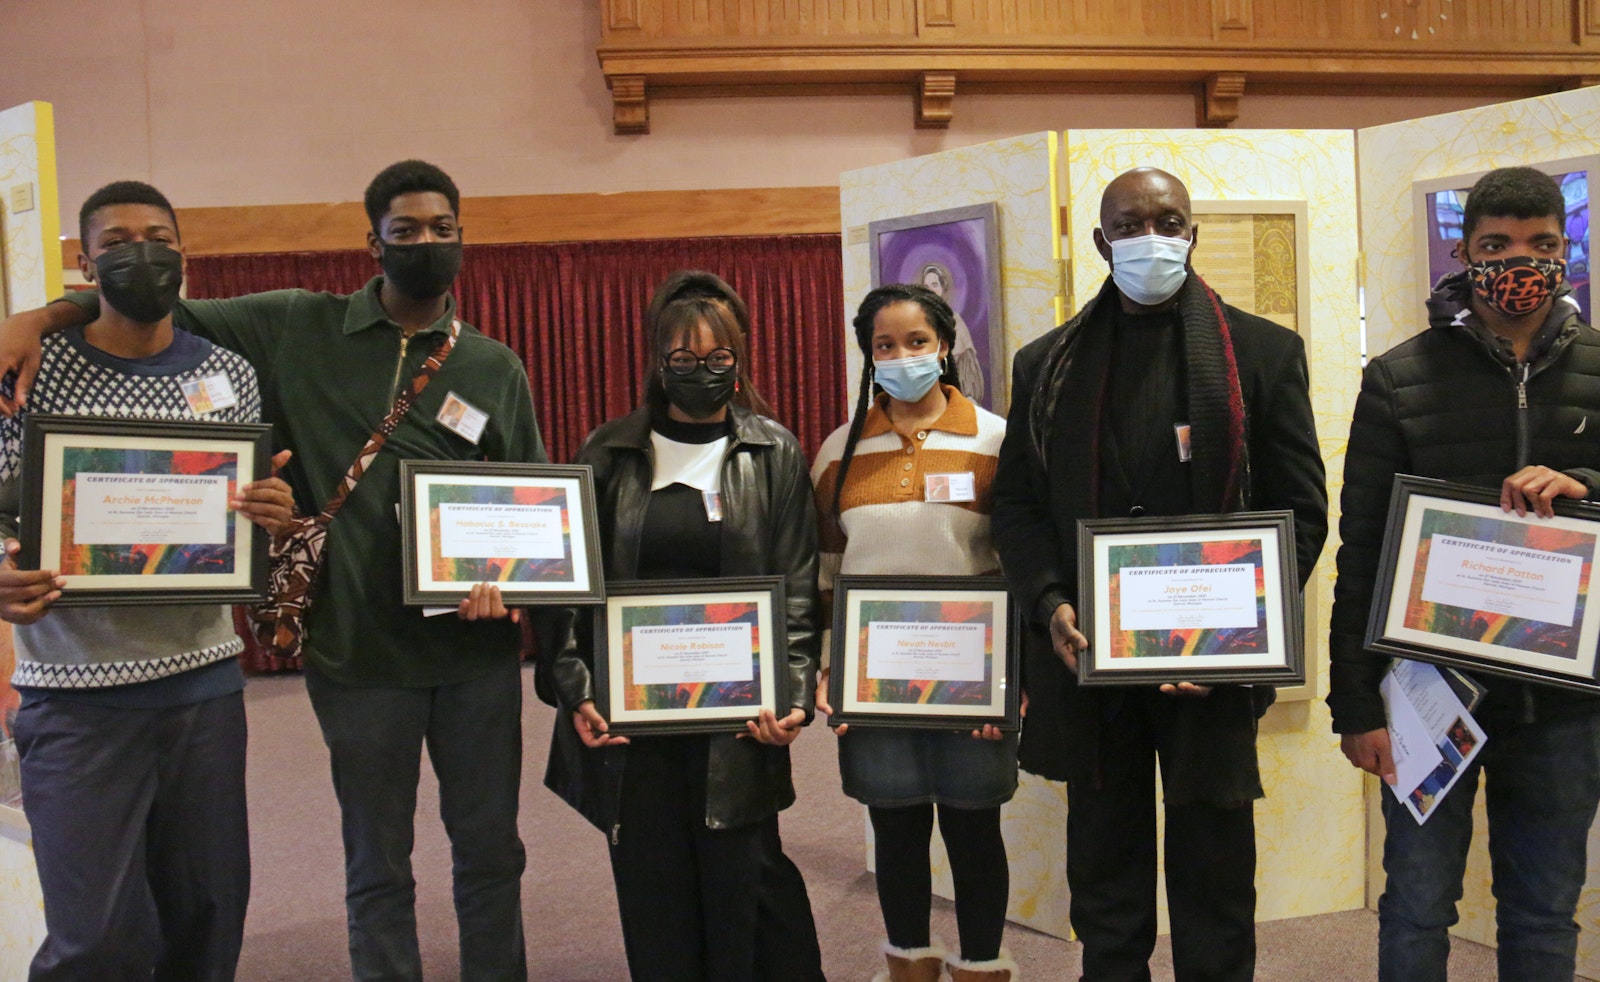 Left to right, Archie McPherson, Habacuc Samuel Bessiake, Nicole Robison, Nevaeh Nesbitt, Joye Ofei and Richard Patton display certificates they received from the Archdiocese of Detroit's Office of Cultural Ministries for their work in the "Celebrate Black Catholics and their Artists" event at St. Suzanne/Our Lady Gate of Heaven Parish.